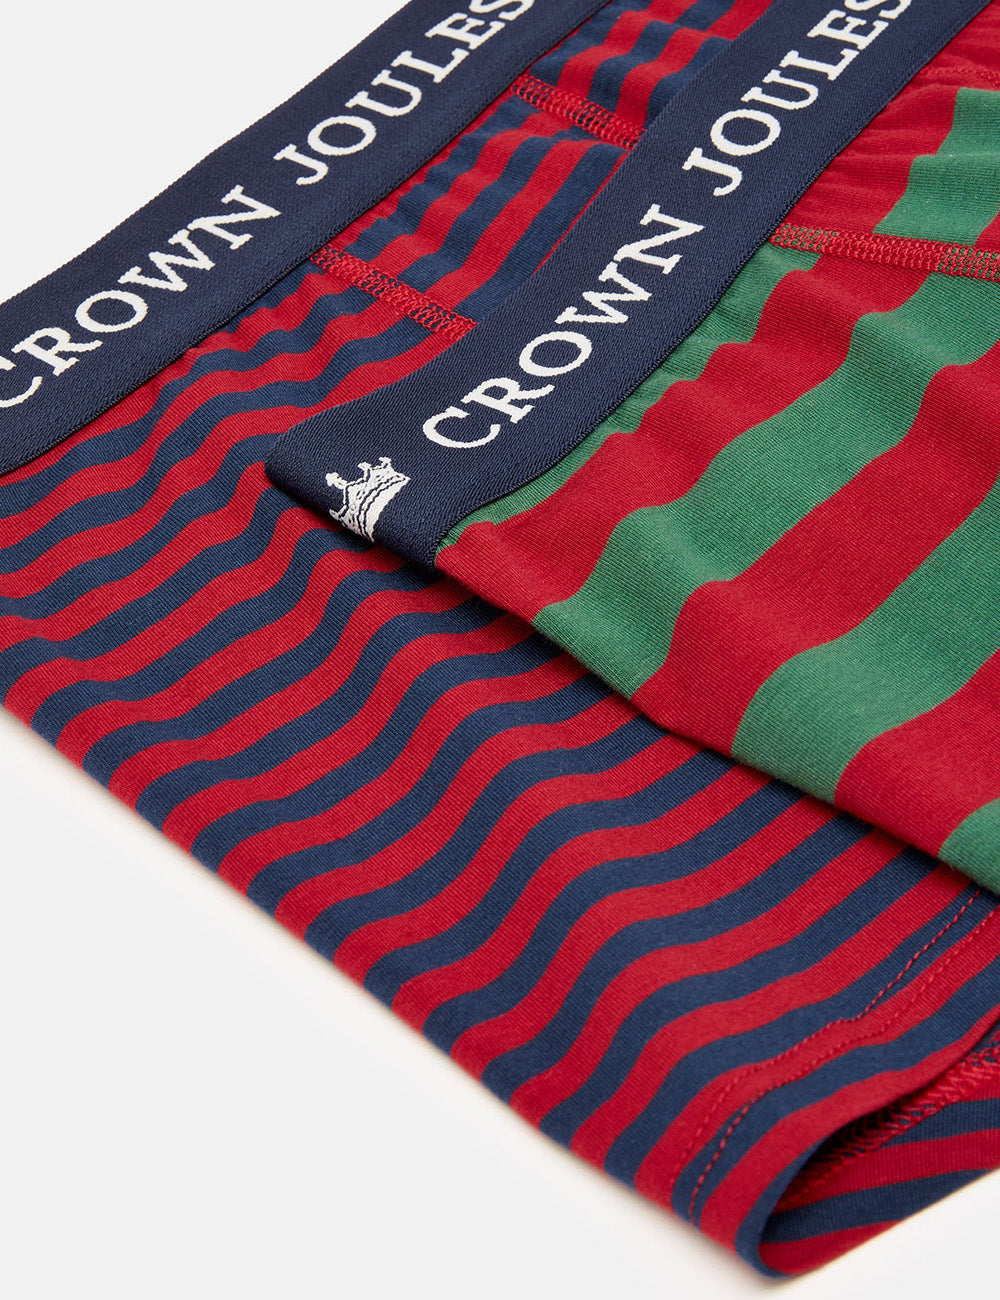 Joules Two Pack Of Boxers - Red/Green Stripe